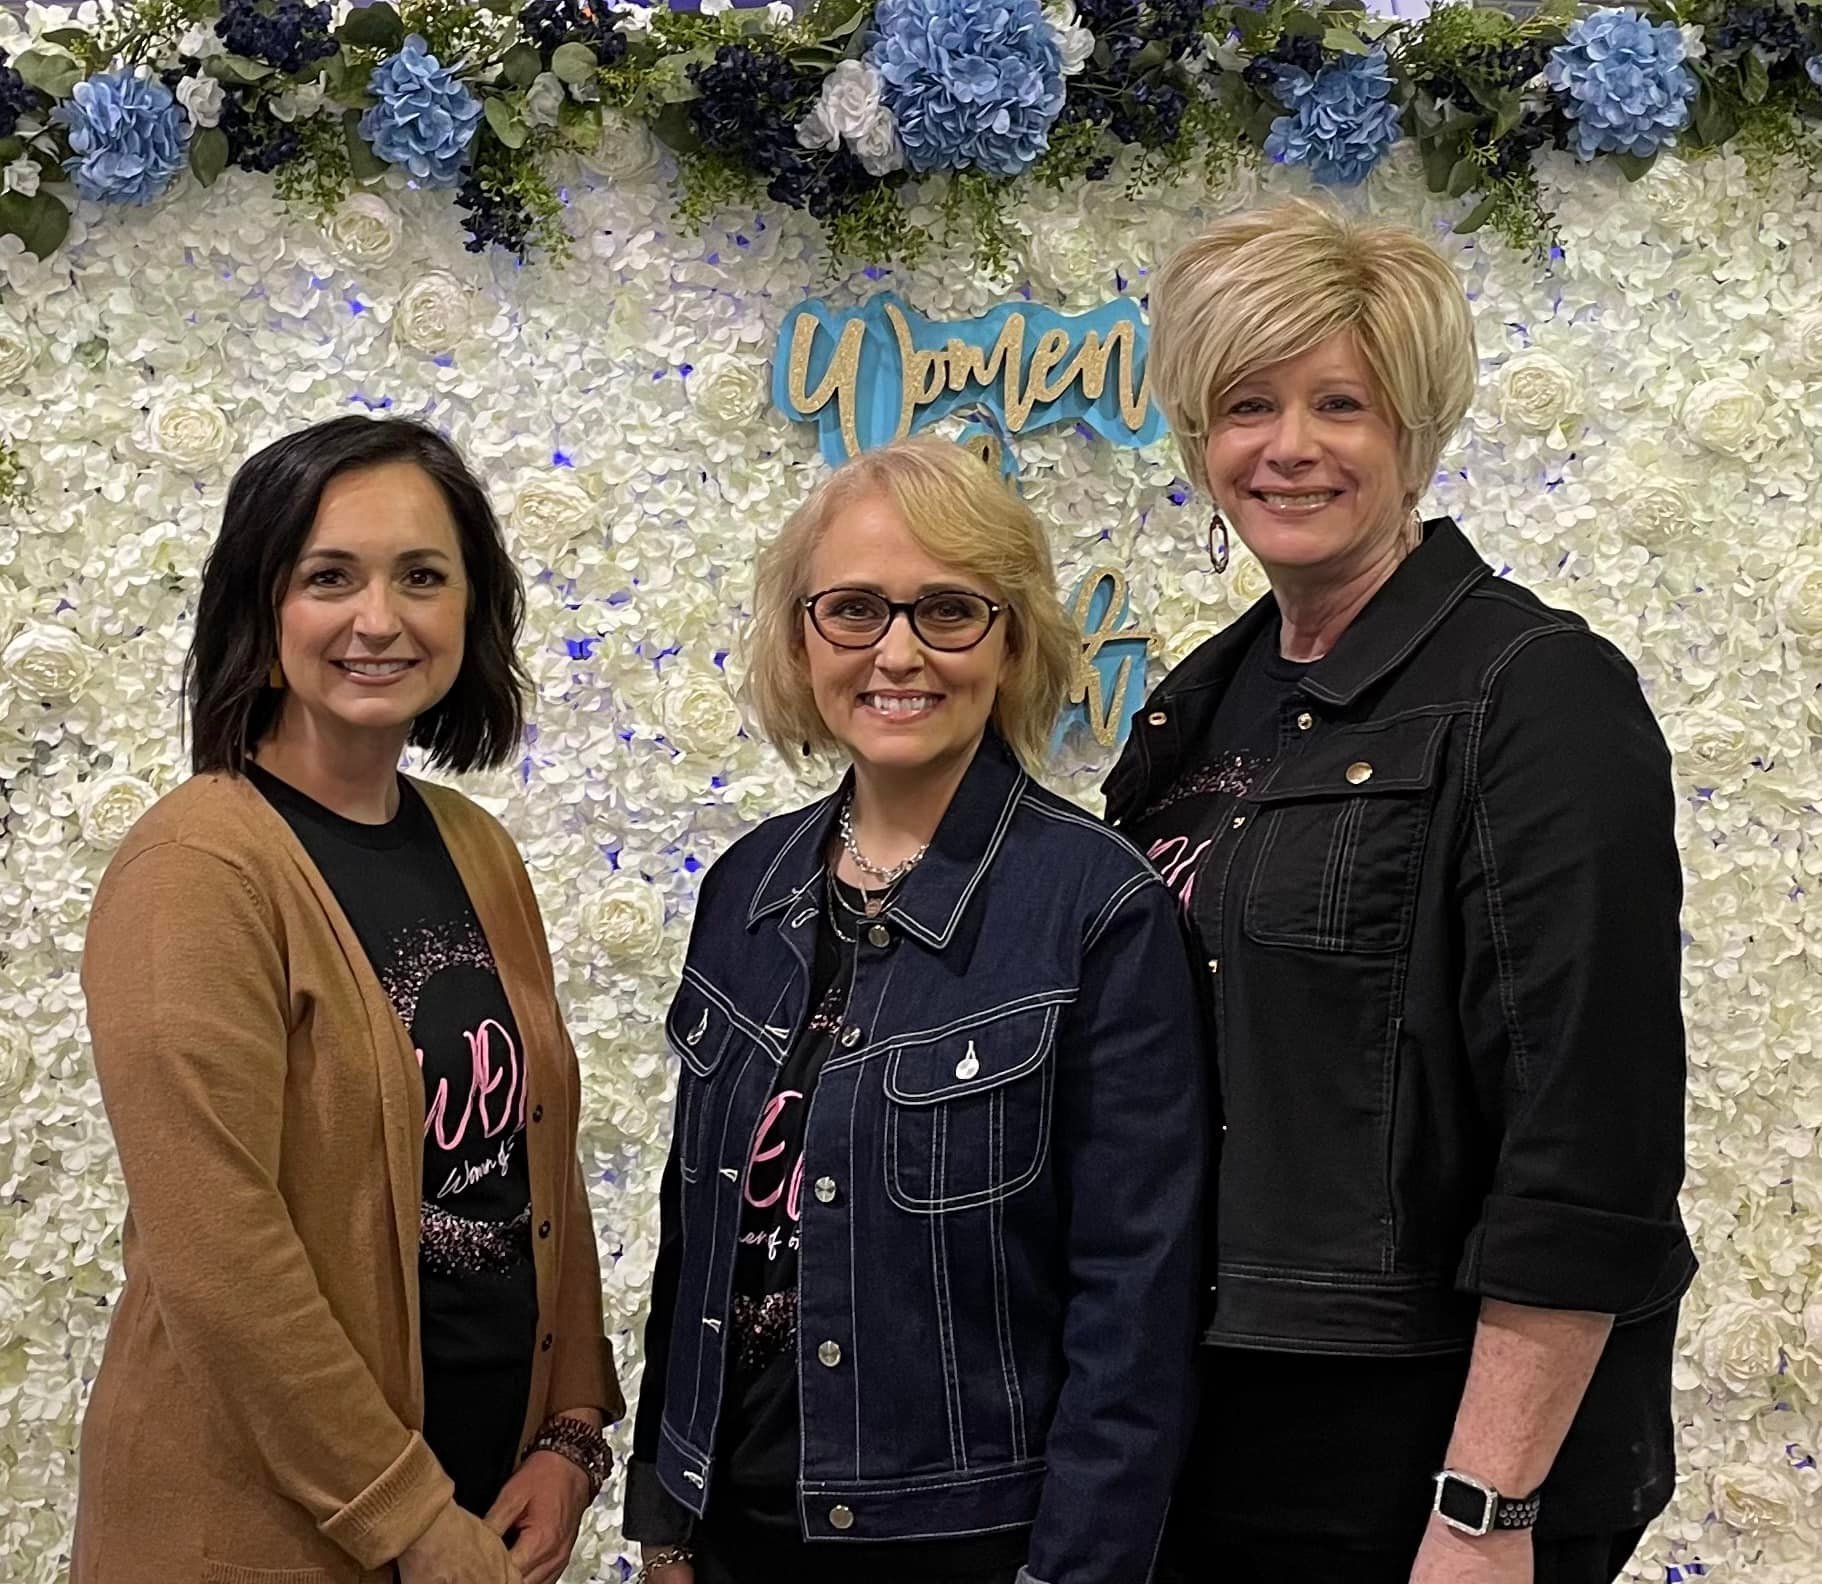 WOW - Women of Worth Conference 💝🙌🏽🔥🤩

Pastors Kimberley Bailey Neff and Kristin Musgrave make ministering today. 

What a blessing!!!!